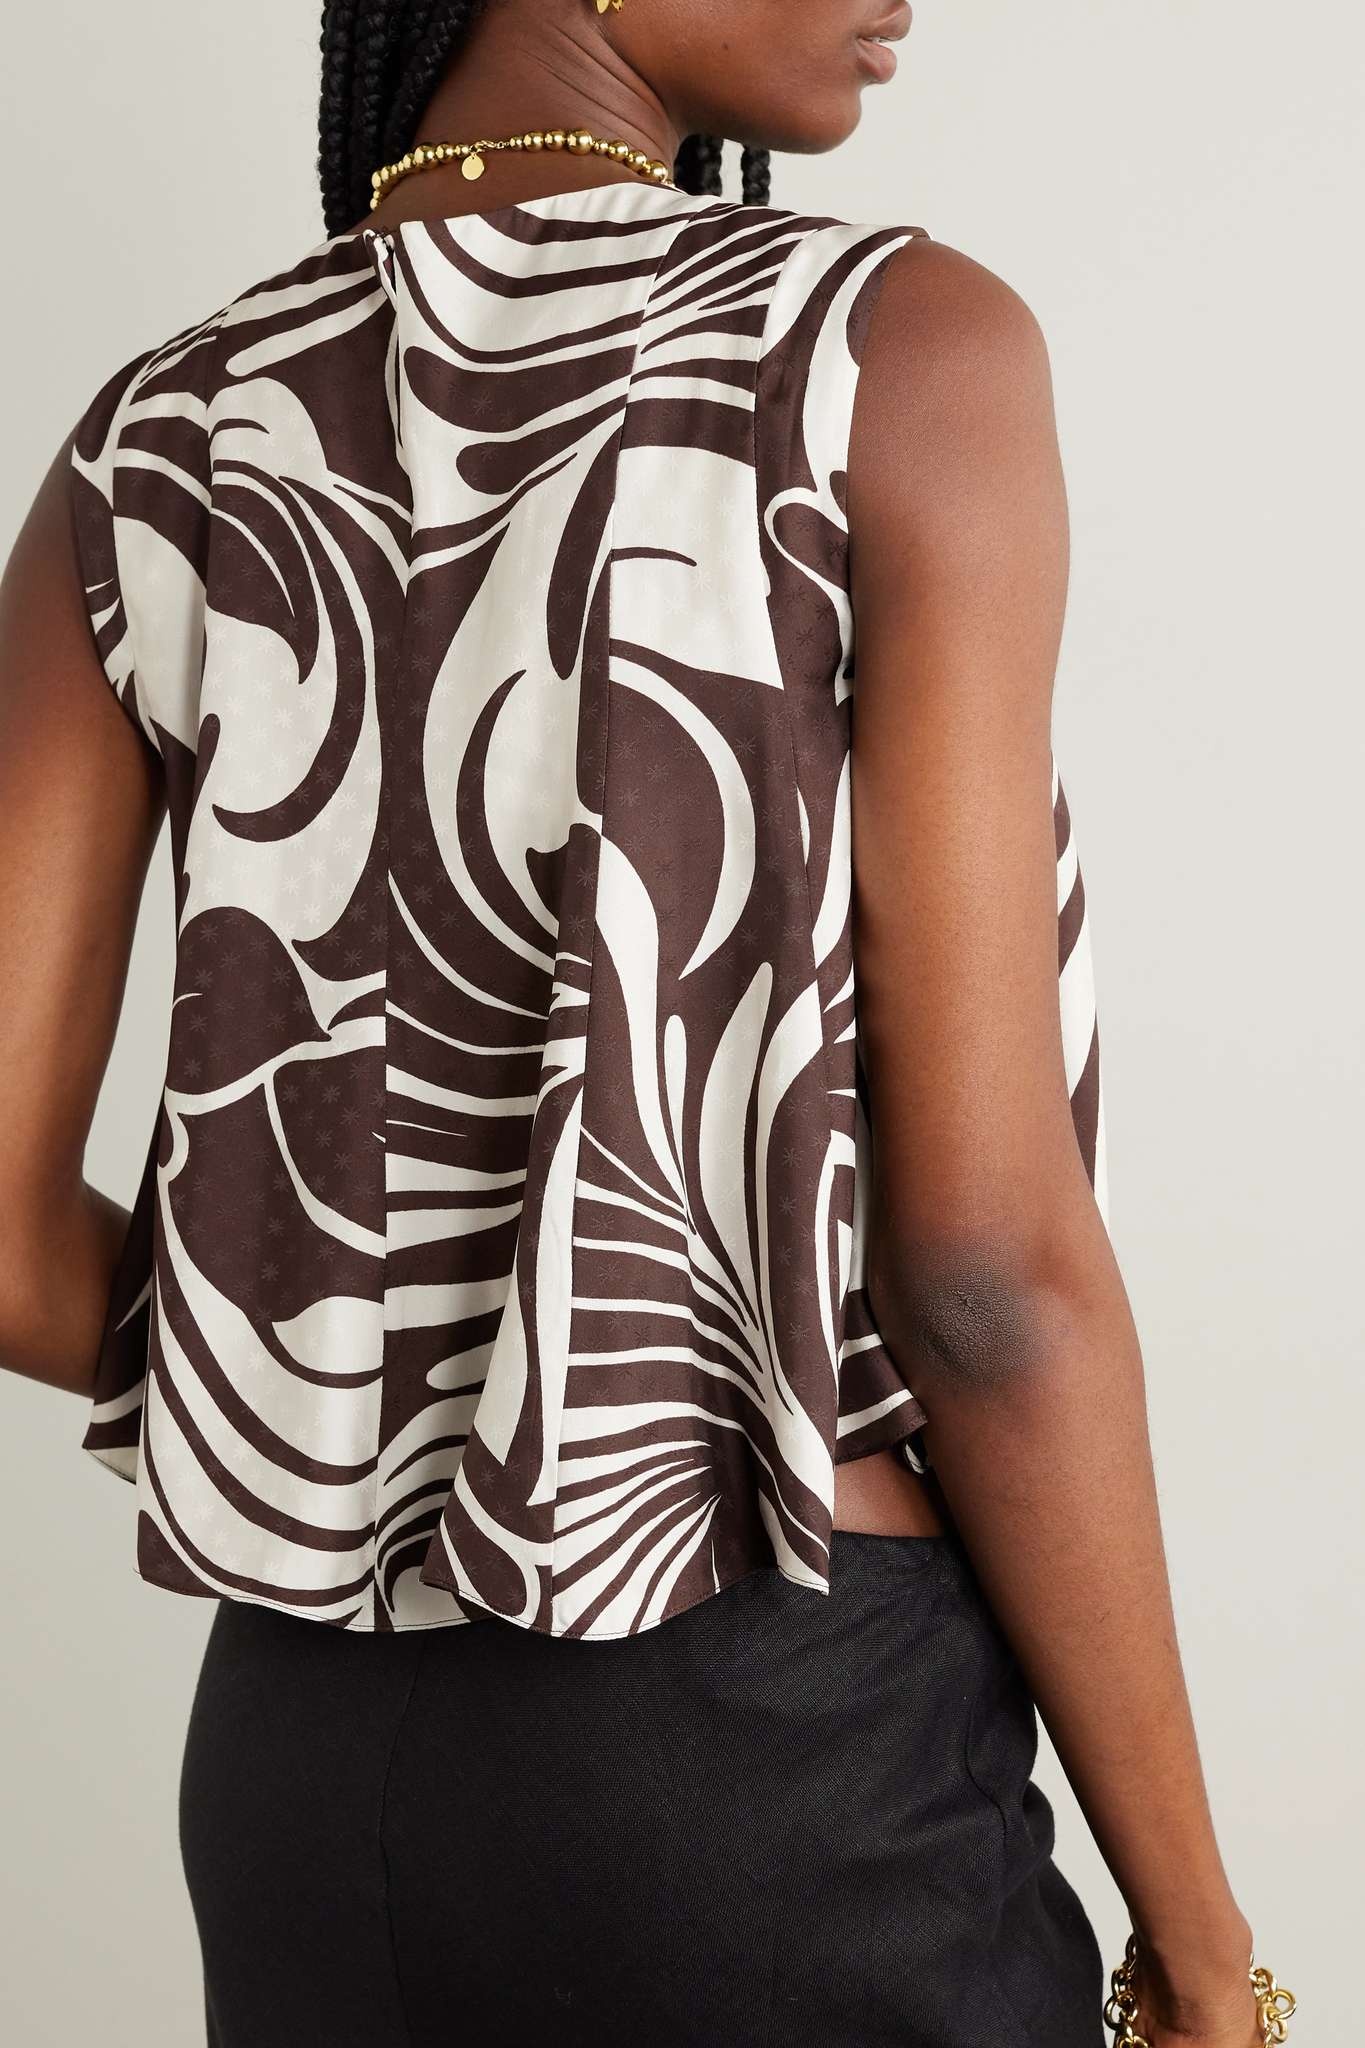 Icing On Top printed jacquard top - 3